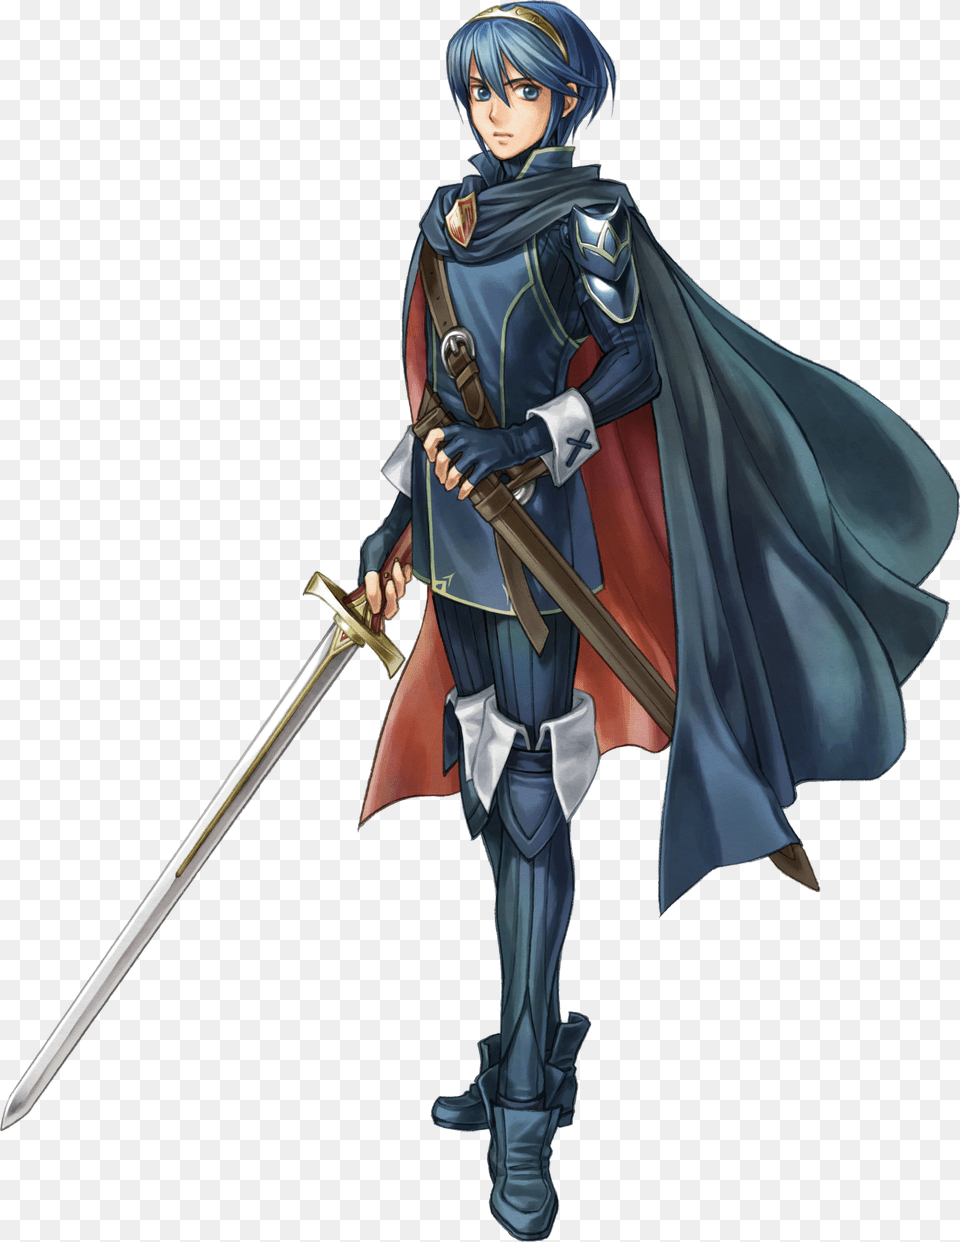 Lucina Looks More Like Marth Thanwell Fire Emblem Marth, Weapon, Sword, Blade, Dagger Free Png Download